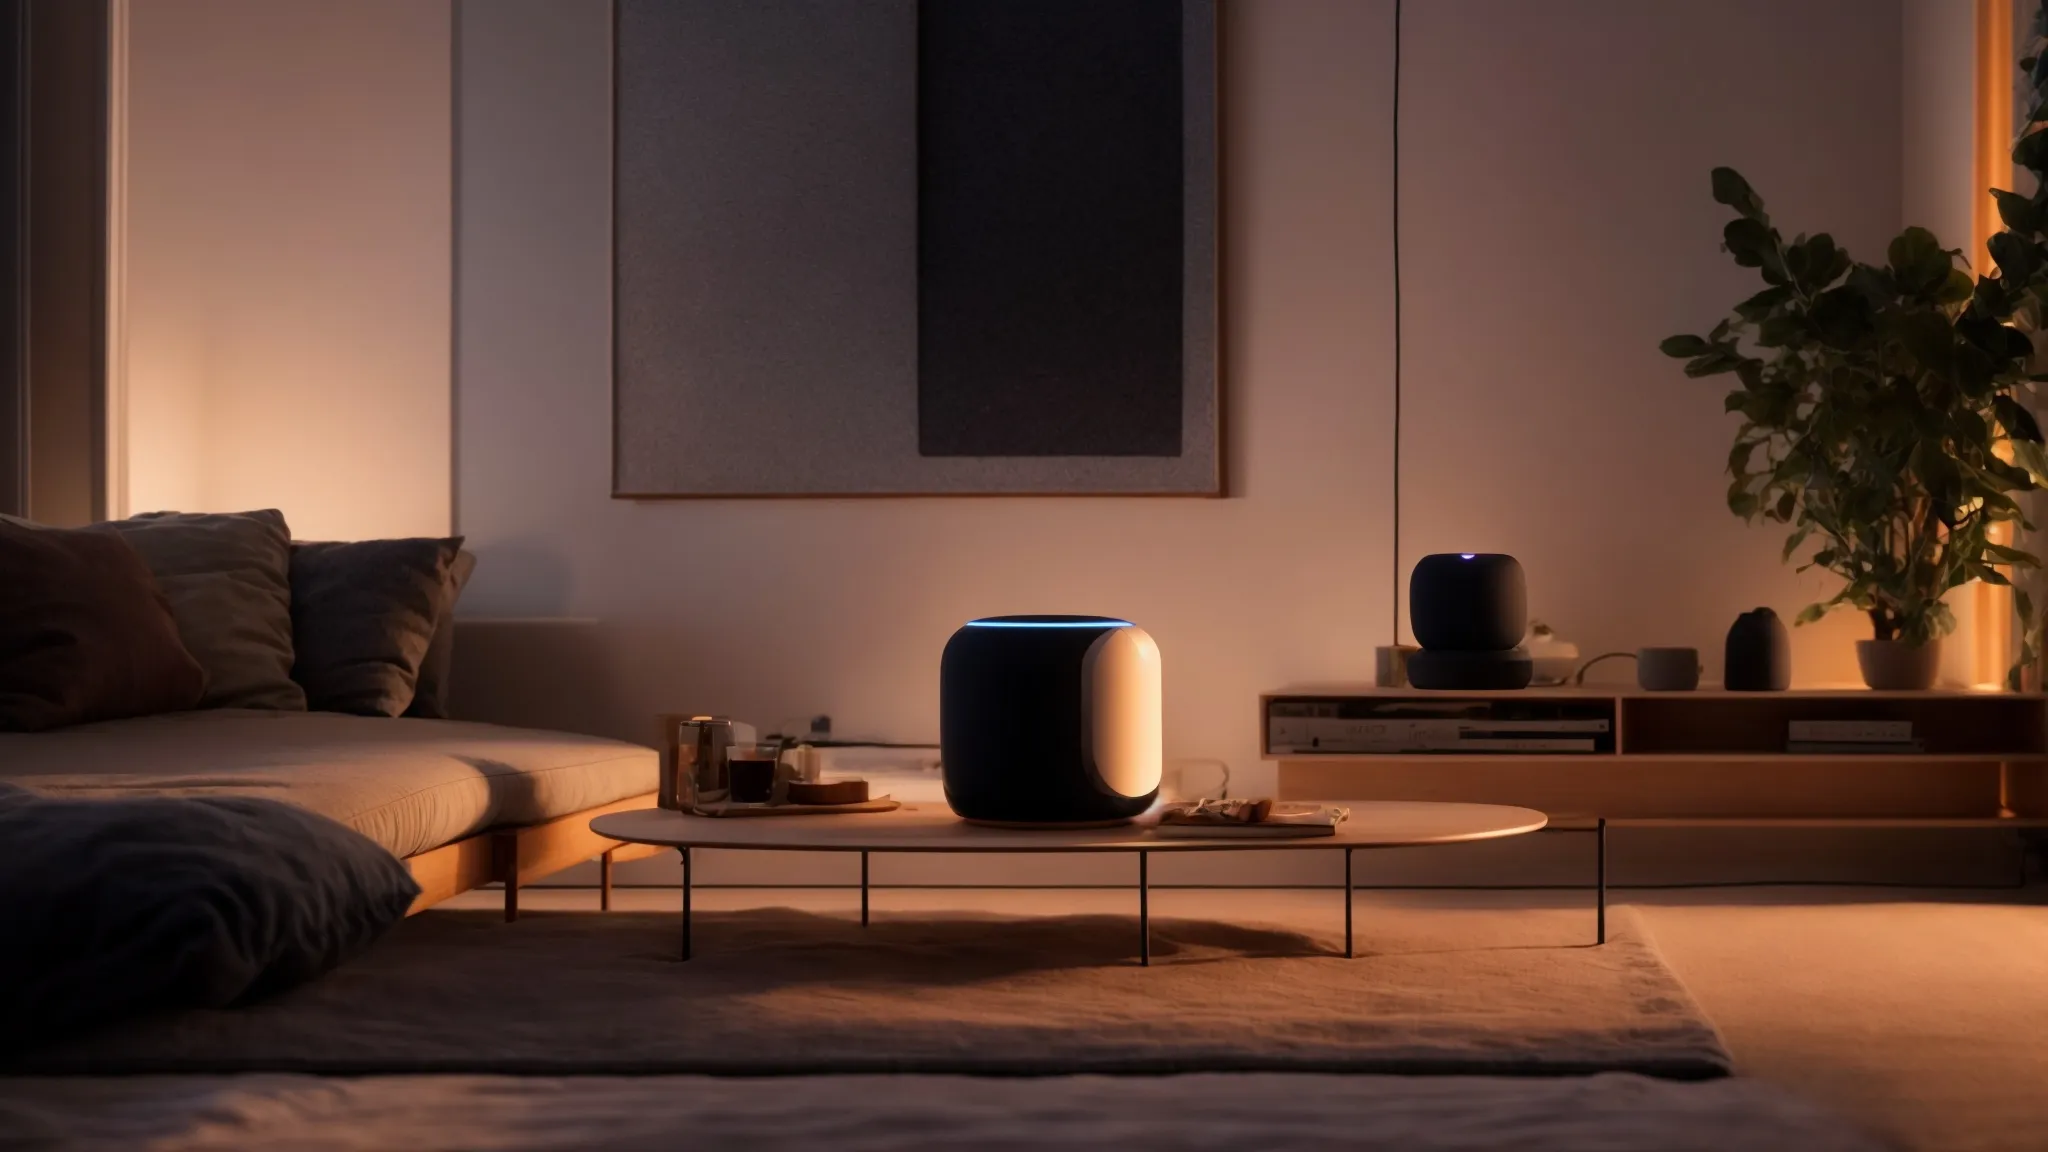 a cozy room at dusk, with a solitary homepod casting soft shadows as music fills the space.